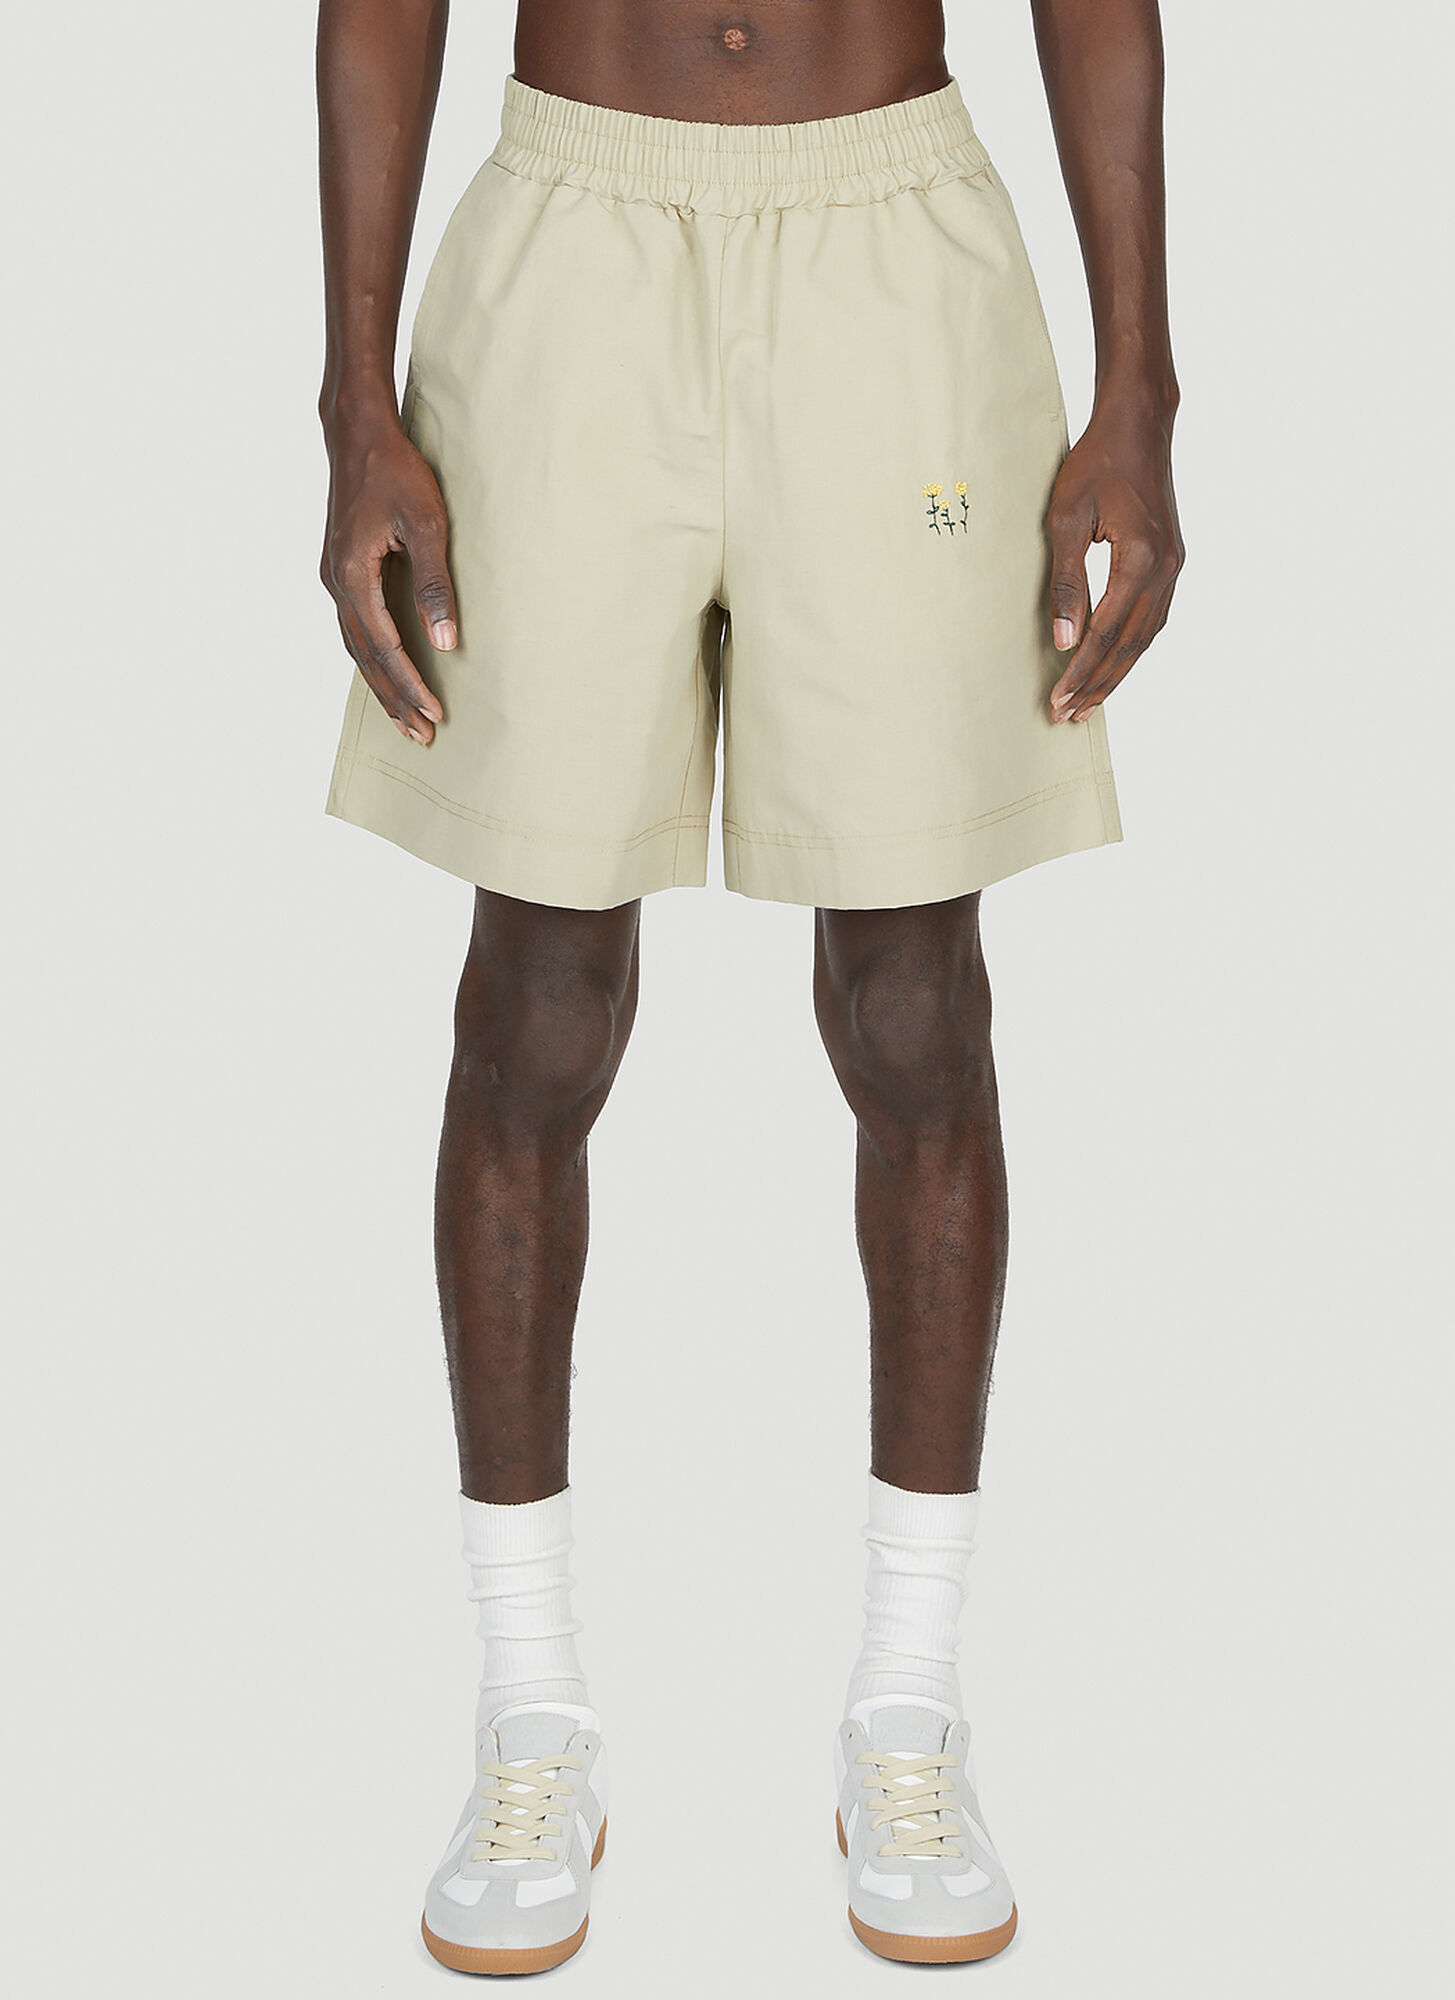 Diomene Embroidered Shorts Male Beige